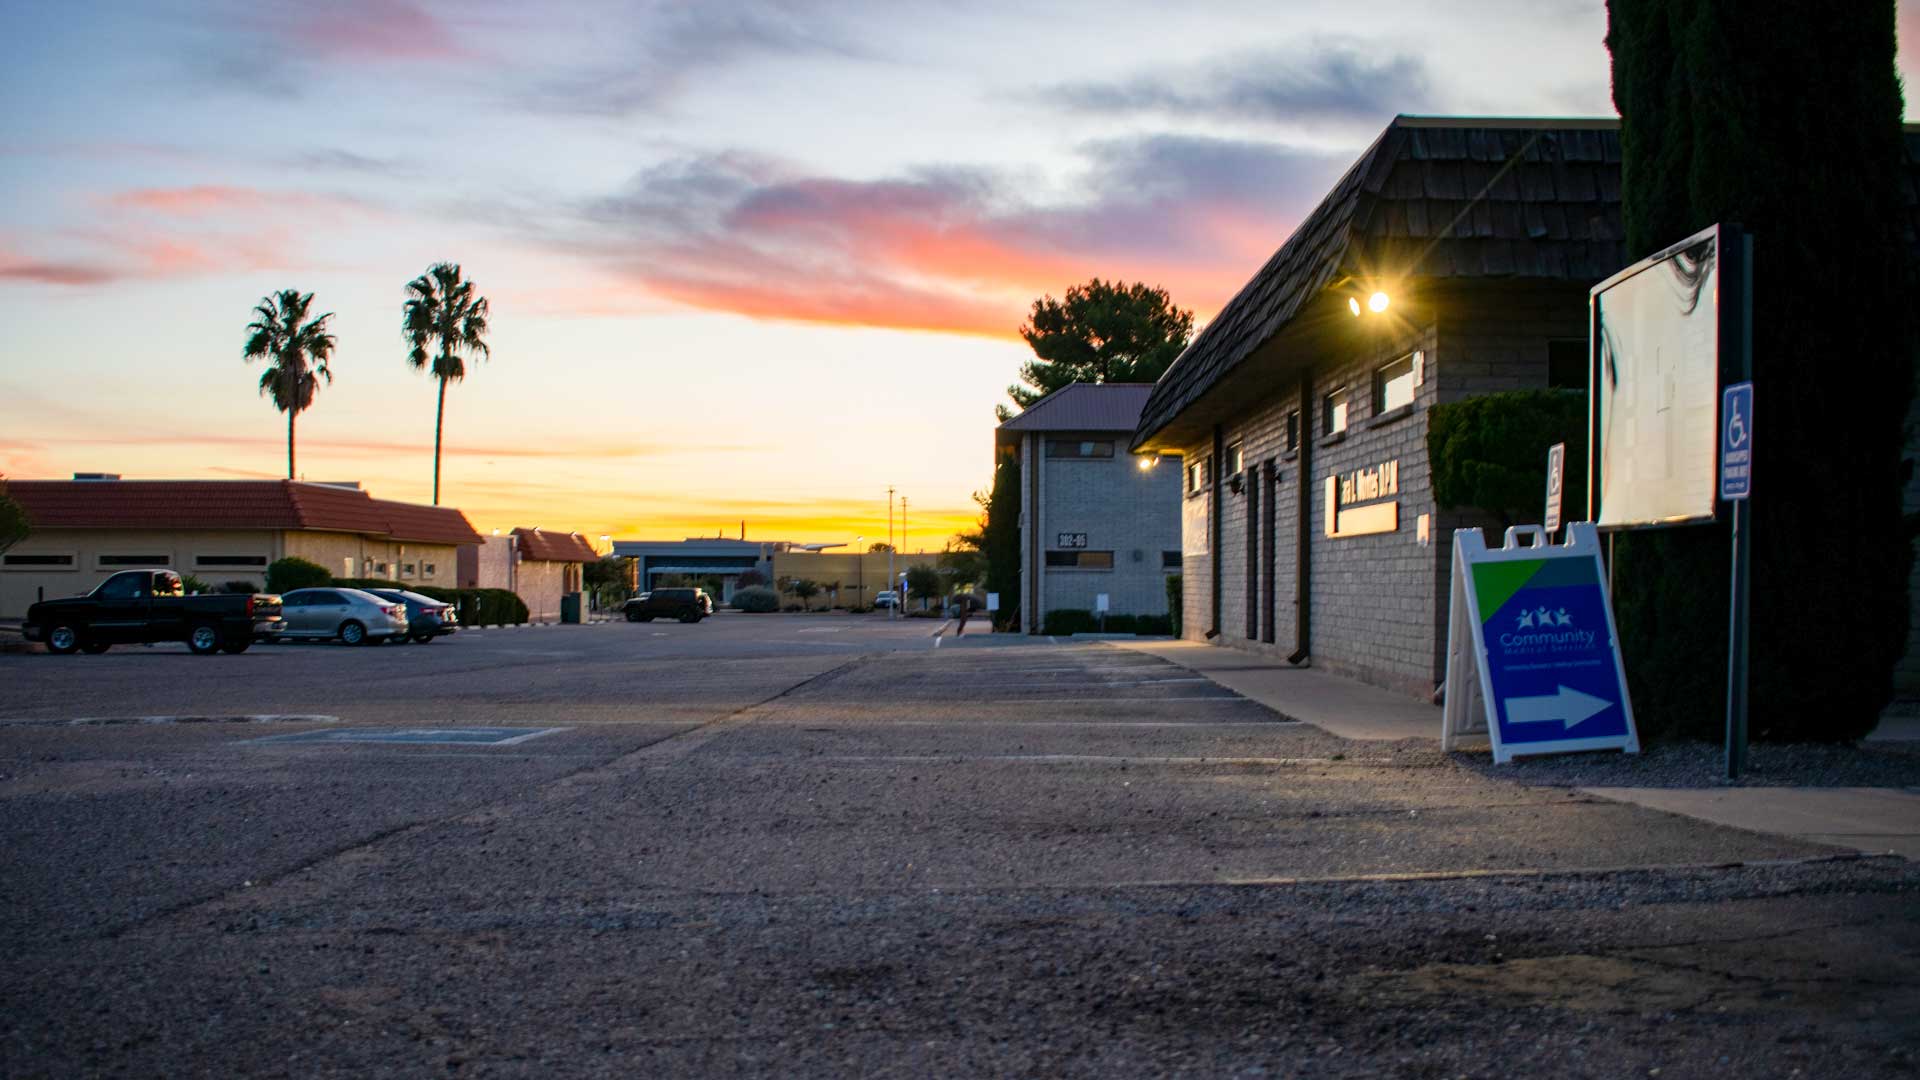 The Community Medical Services clinic in Sierra Vista opened in March 2019. It serves about 130 patients and operates from 4:30 a.m. to 11:30 a.m.